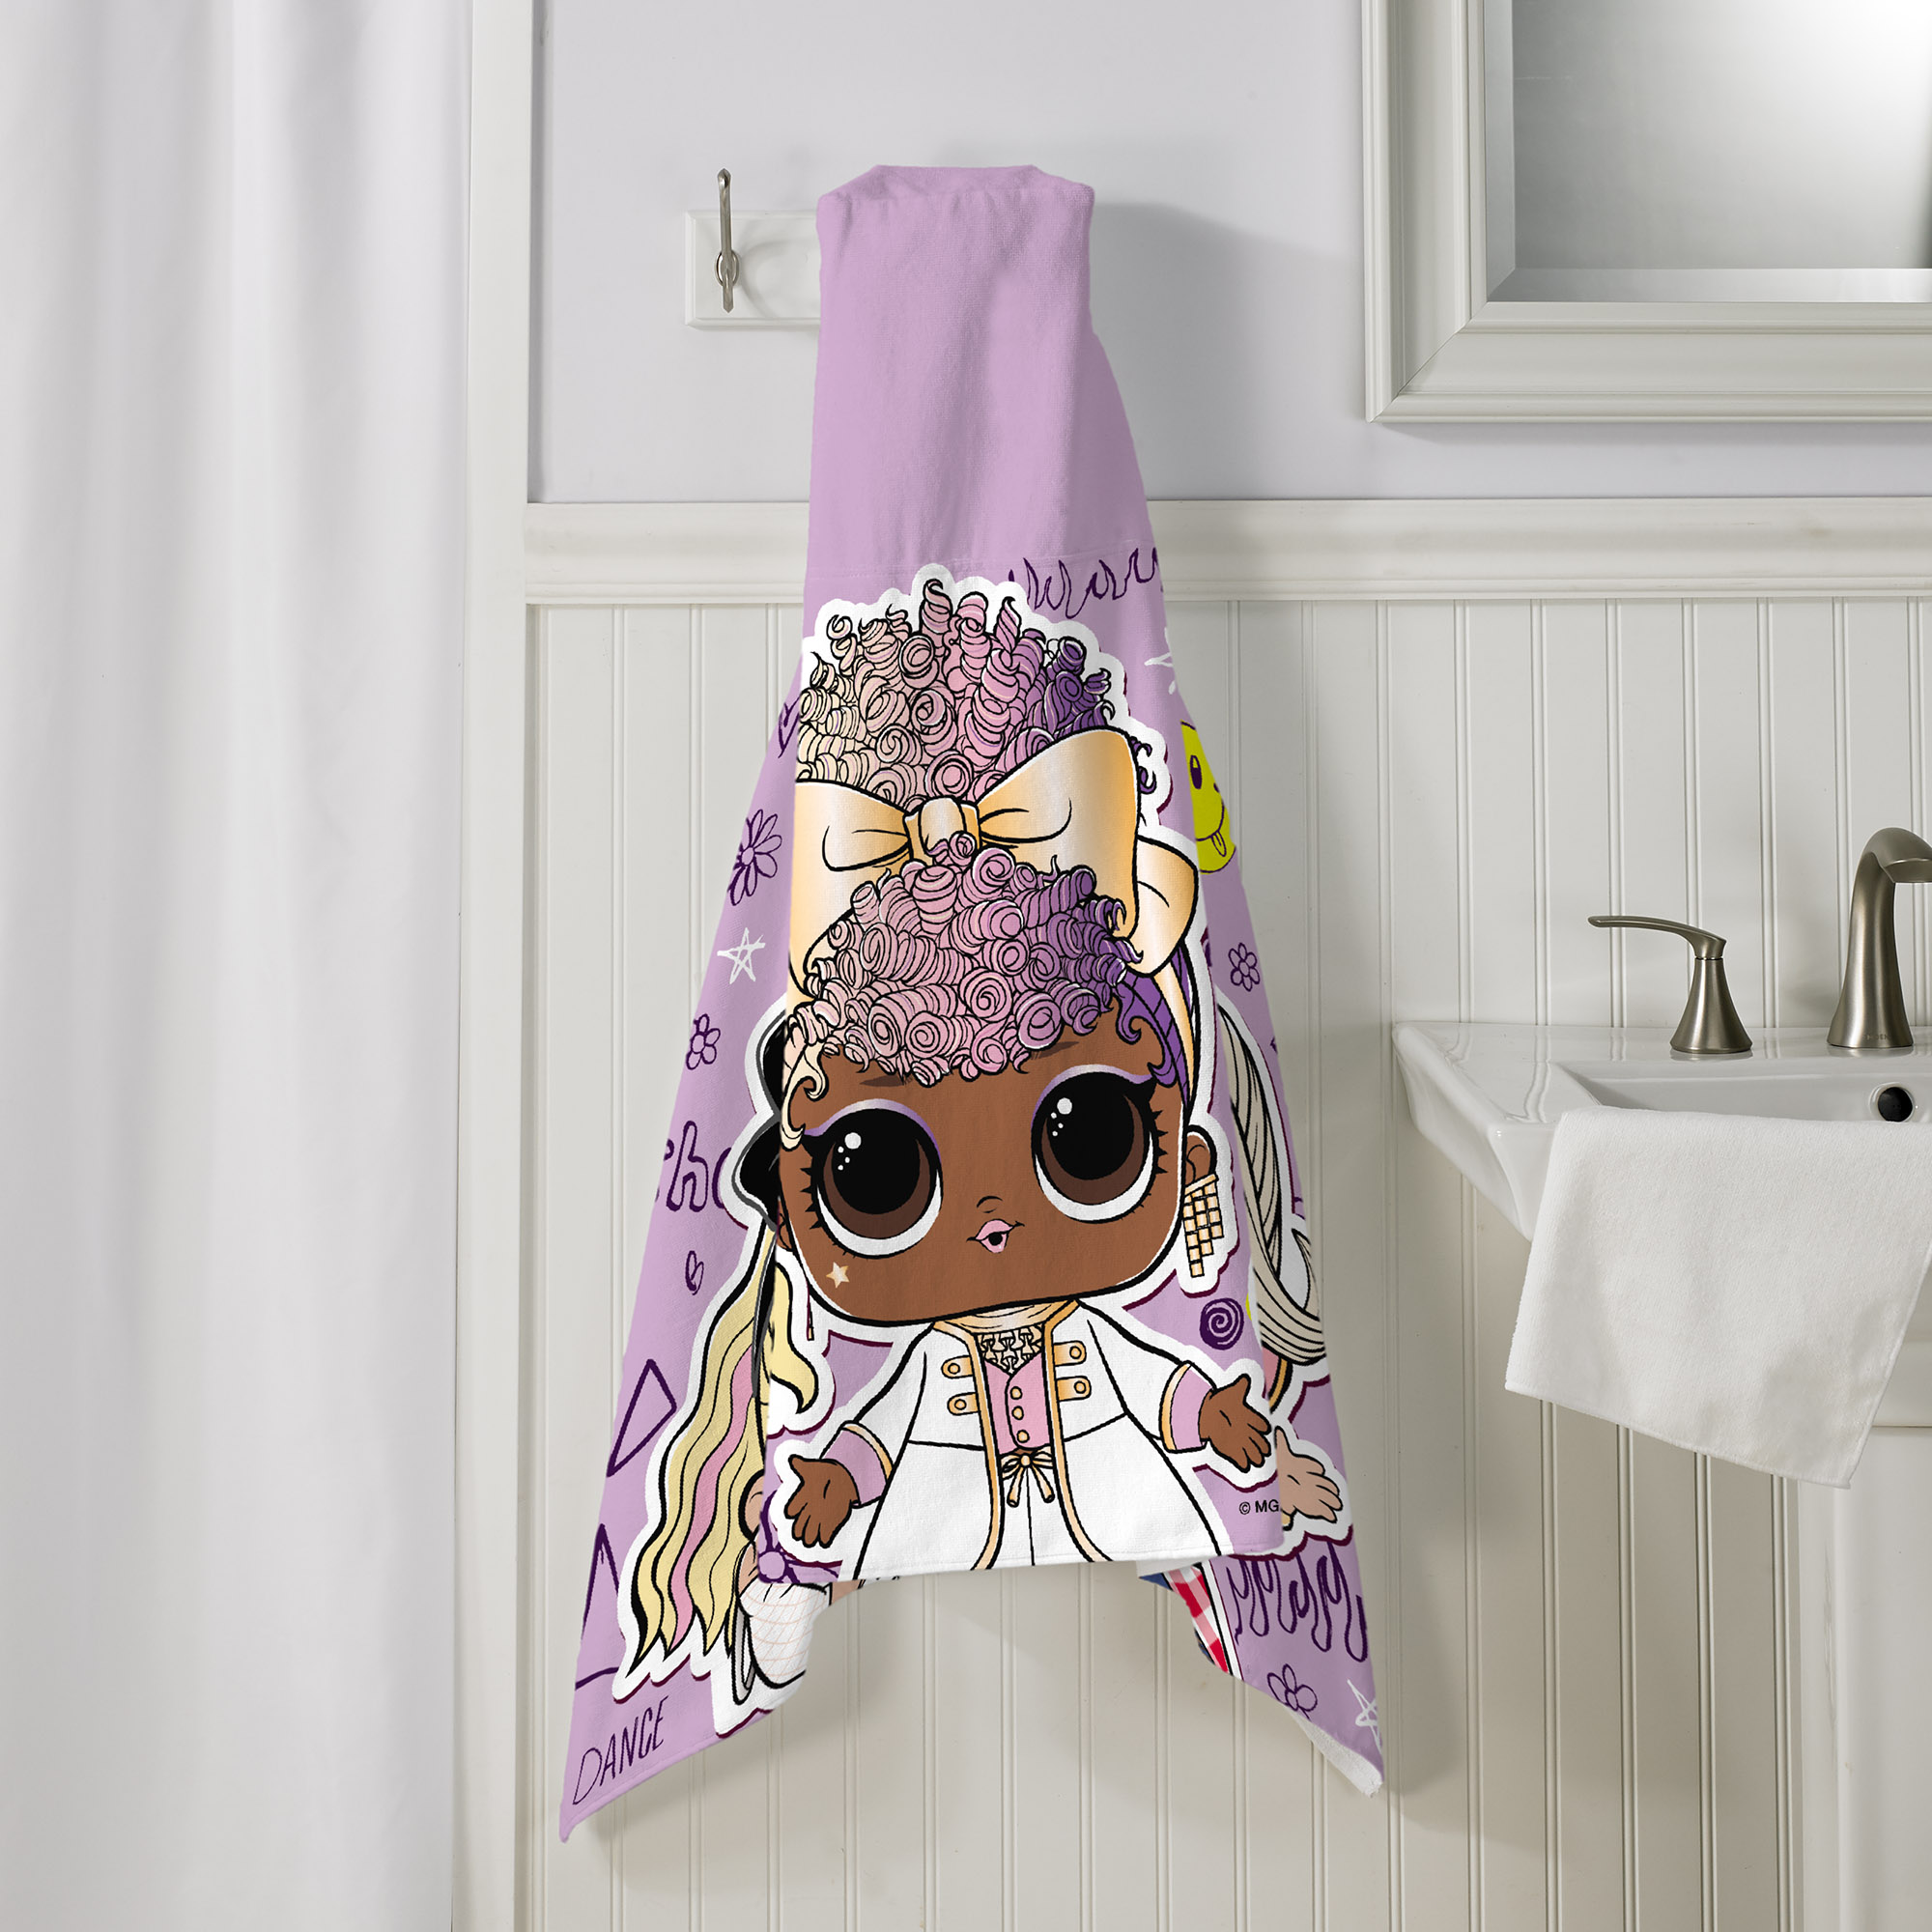 LOL Surprise Kids Purple Queen Hooded Towel, Cotton, Purple, MGA - image 9 of 10